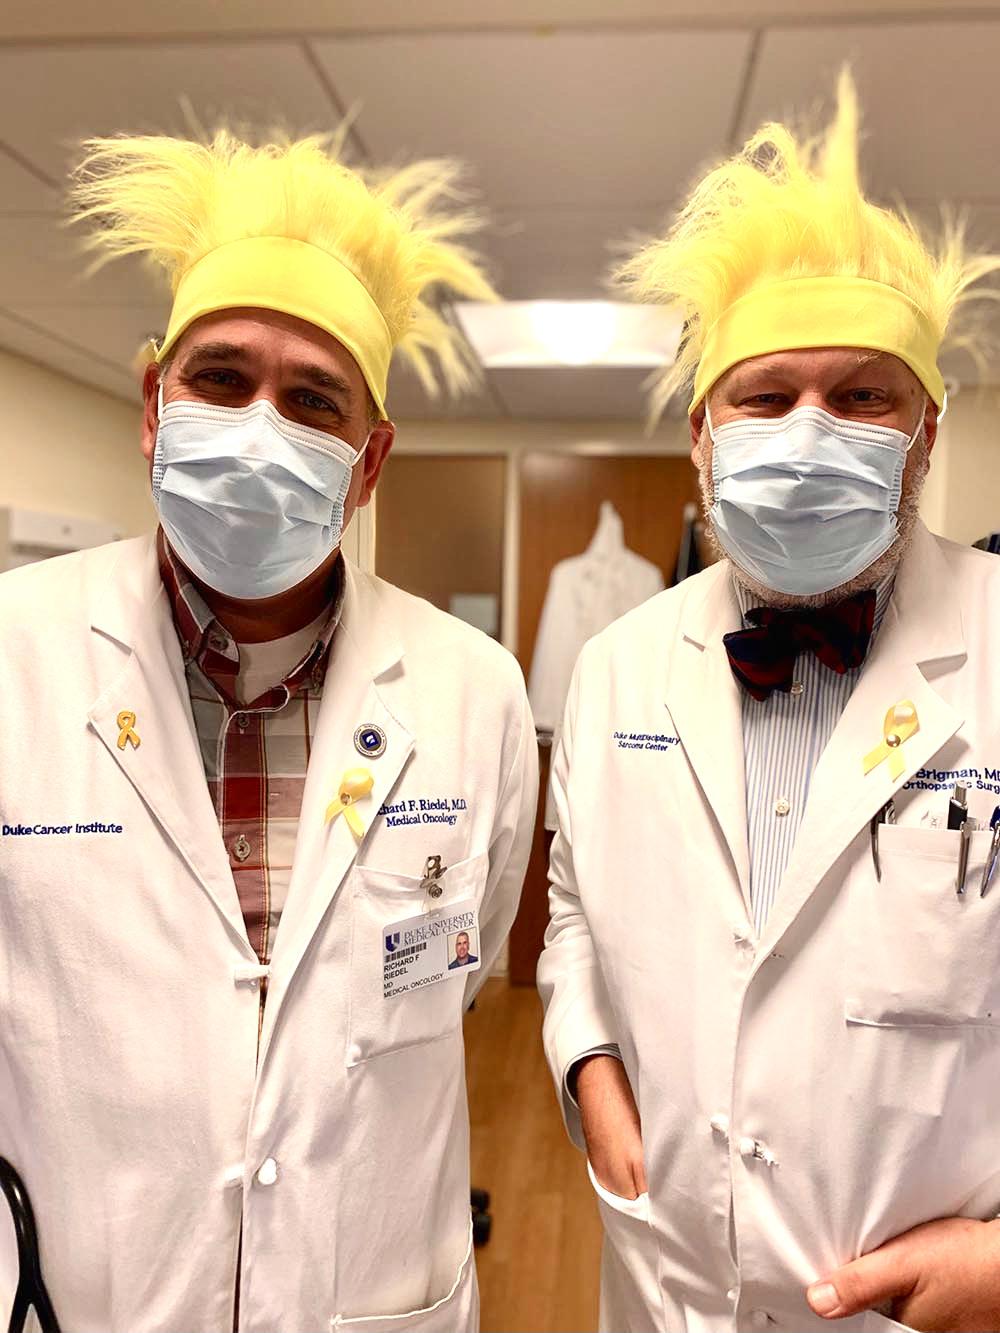 Two men in white coats and surgical masks with blond wigs